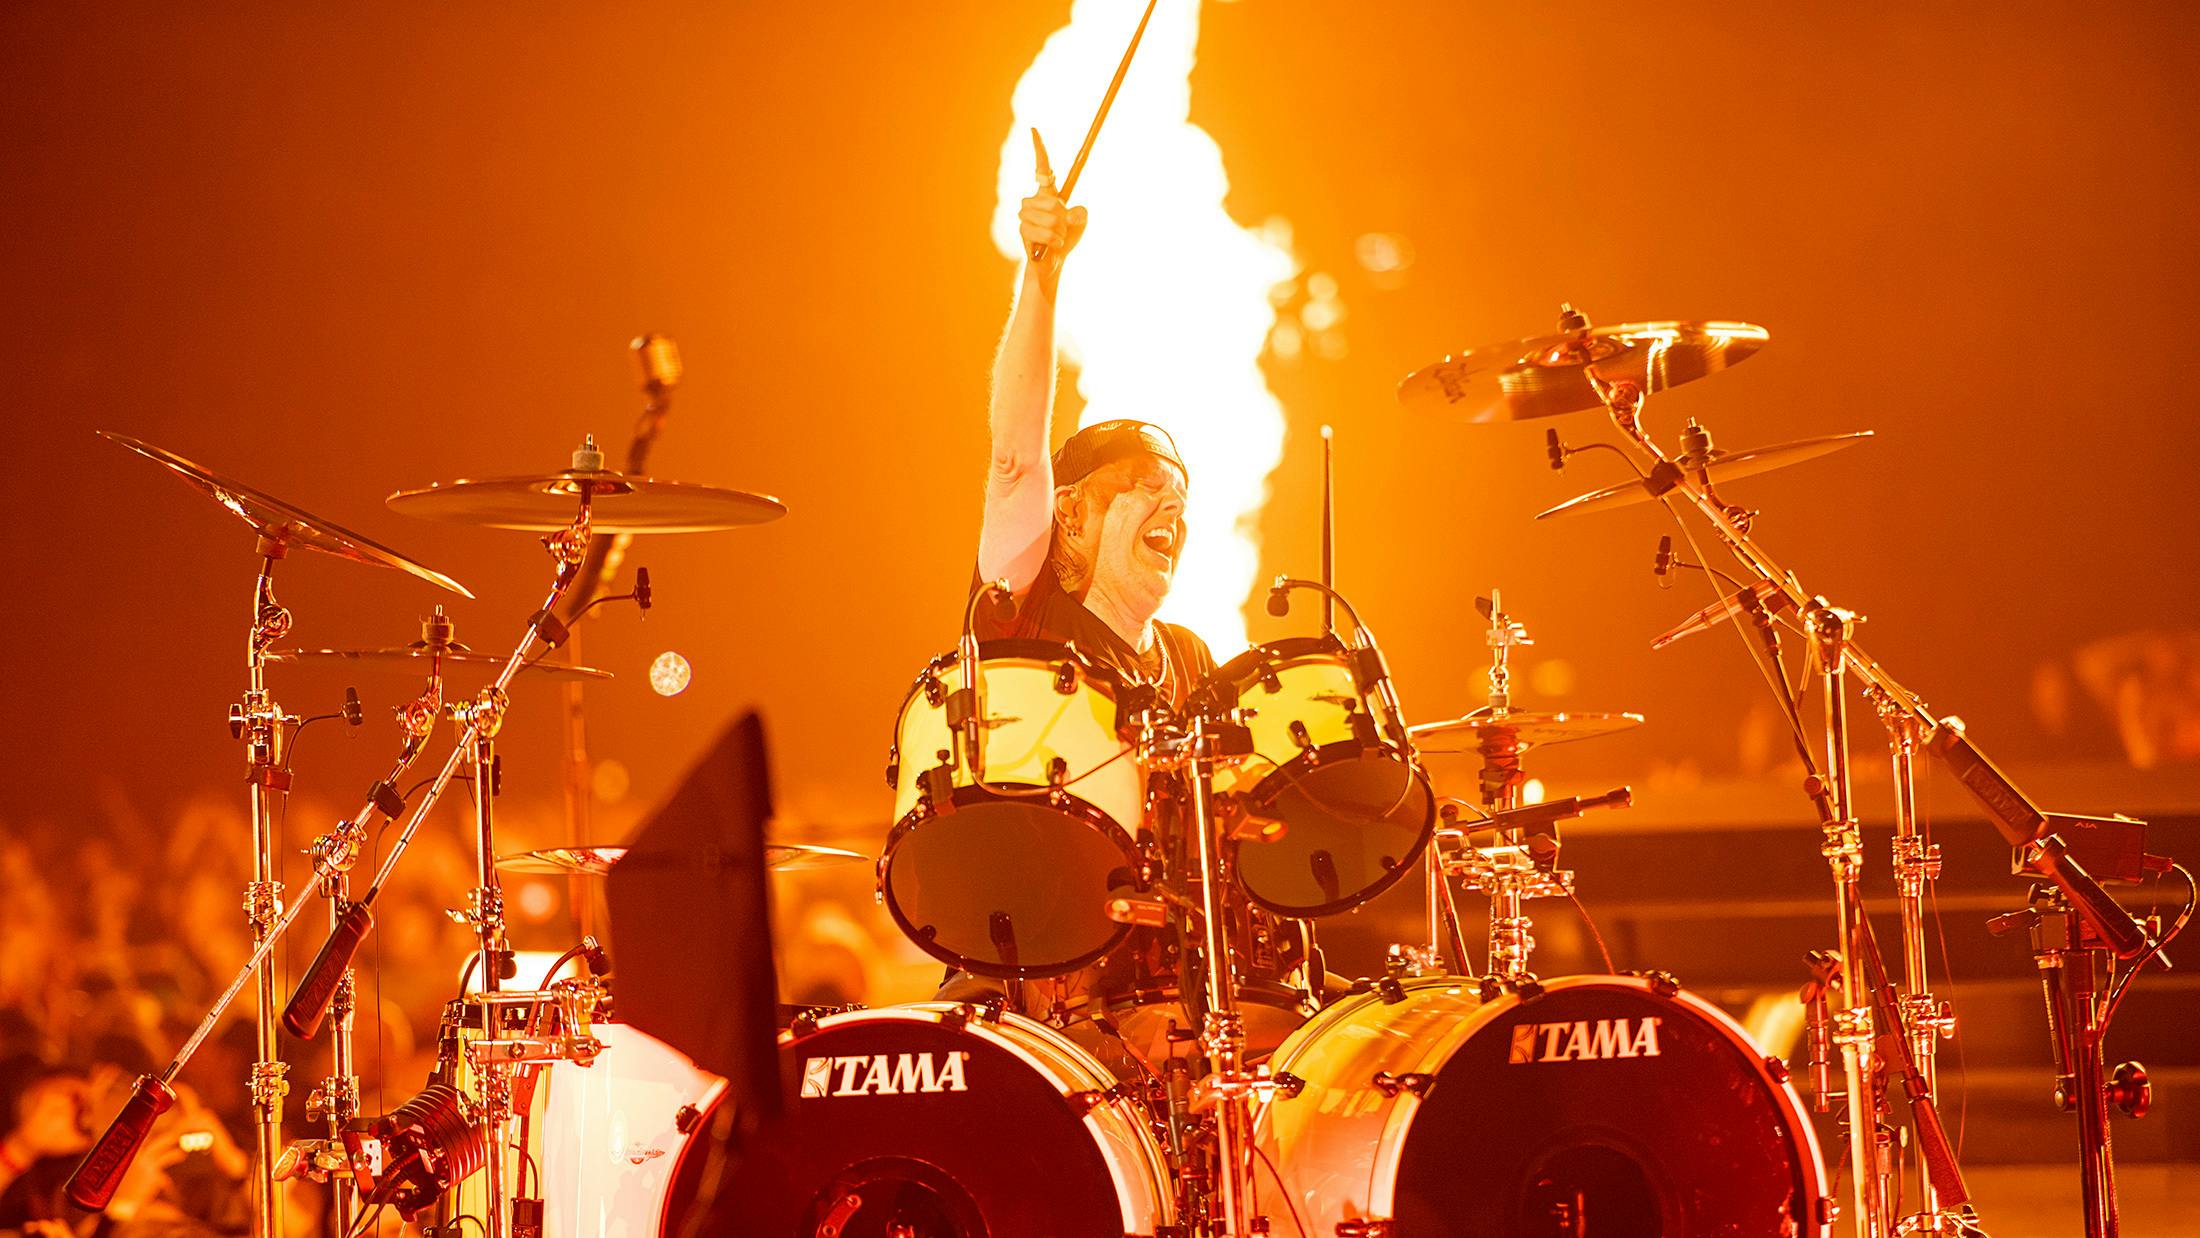 Two nights, 32 songs, 100,000 fans: The full review of Metallica’s M72 opening shows